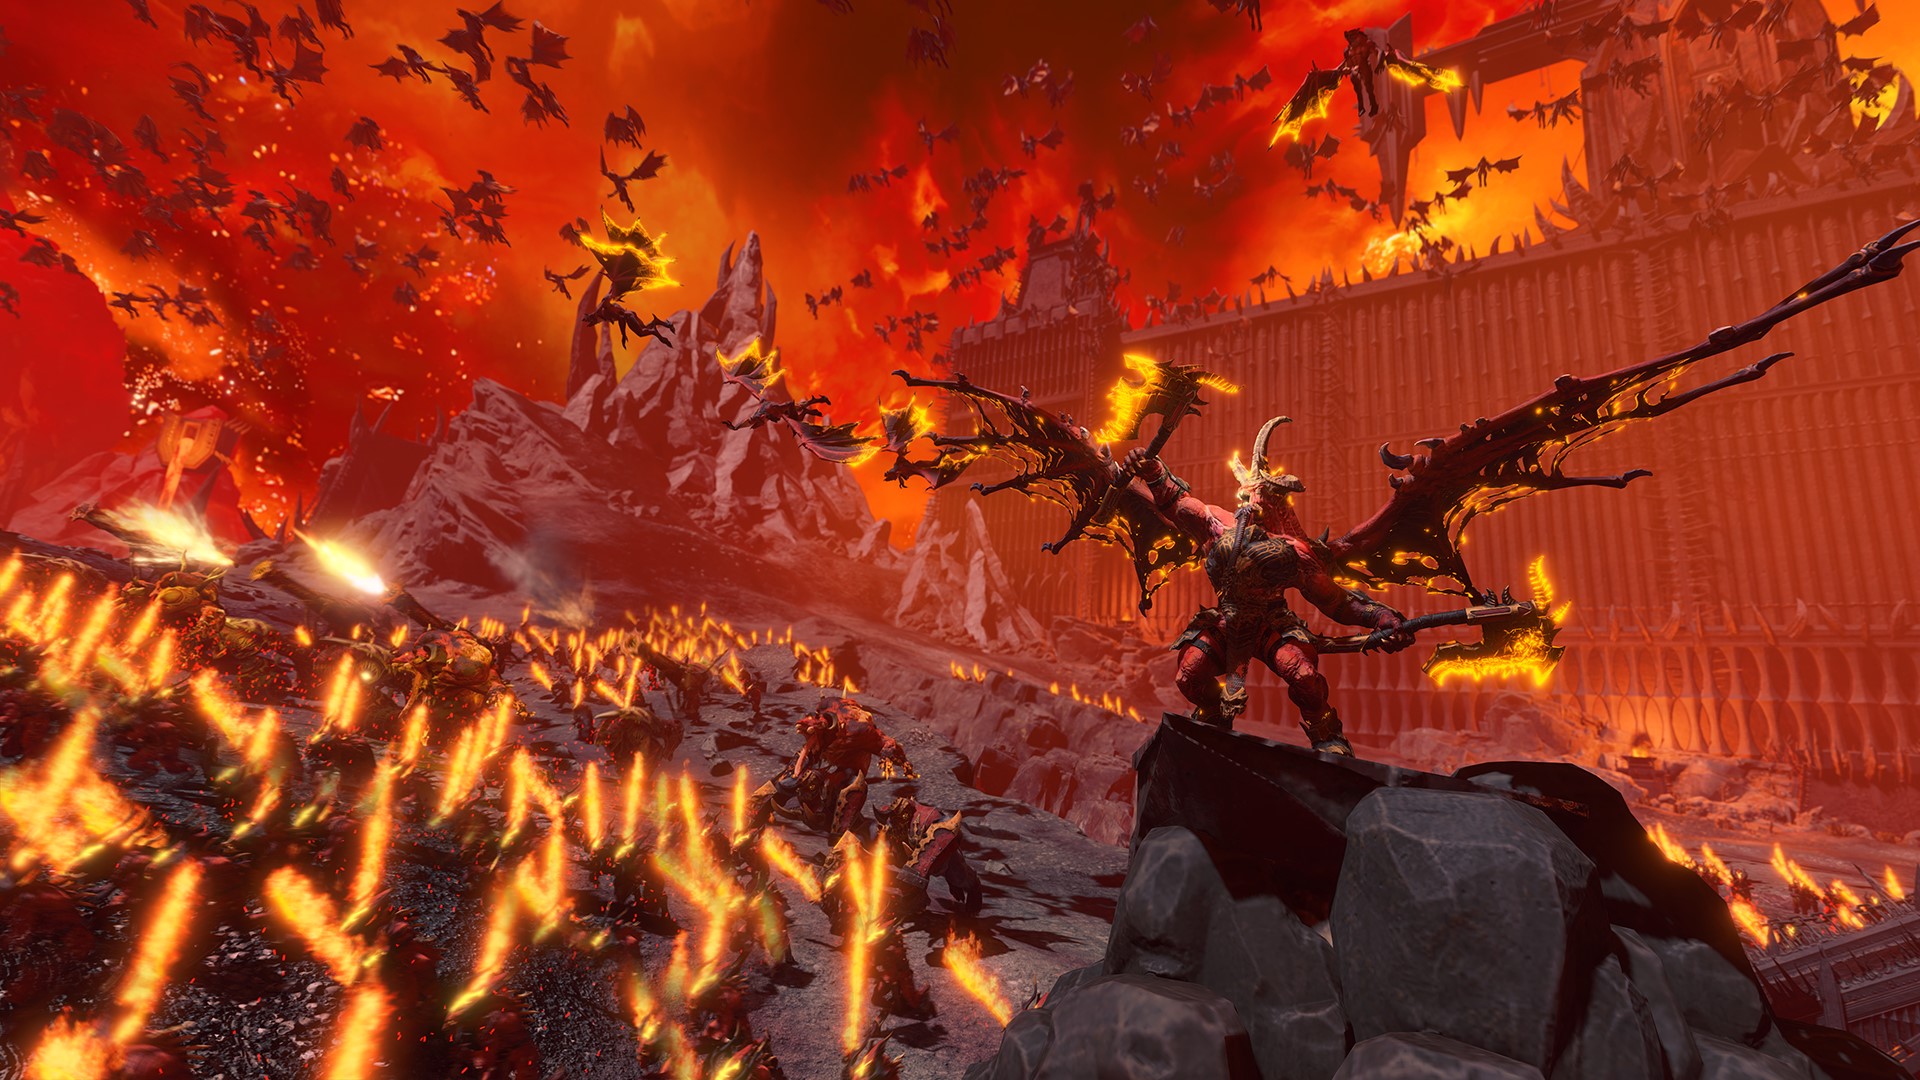 Total War: Warhammer 3’s Khorne army roster has been revealed